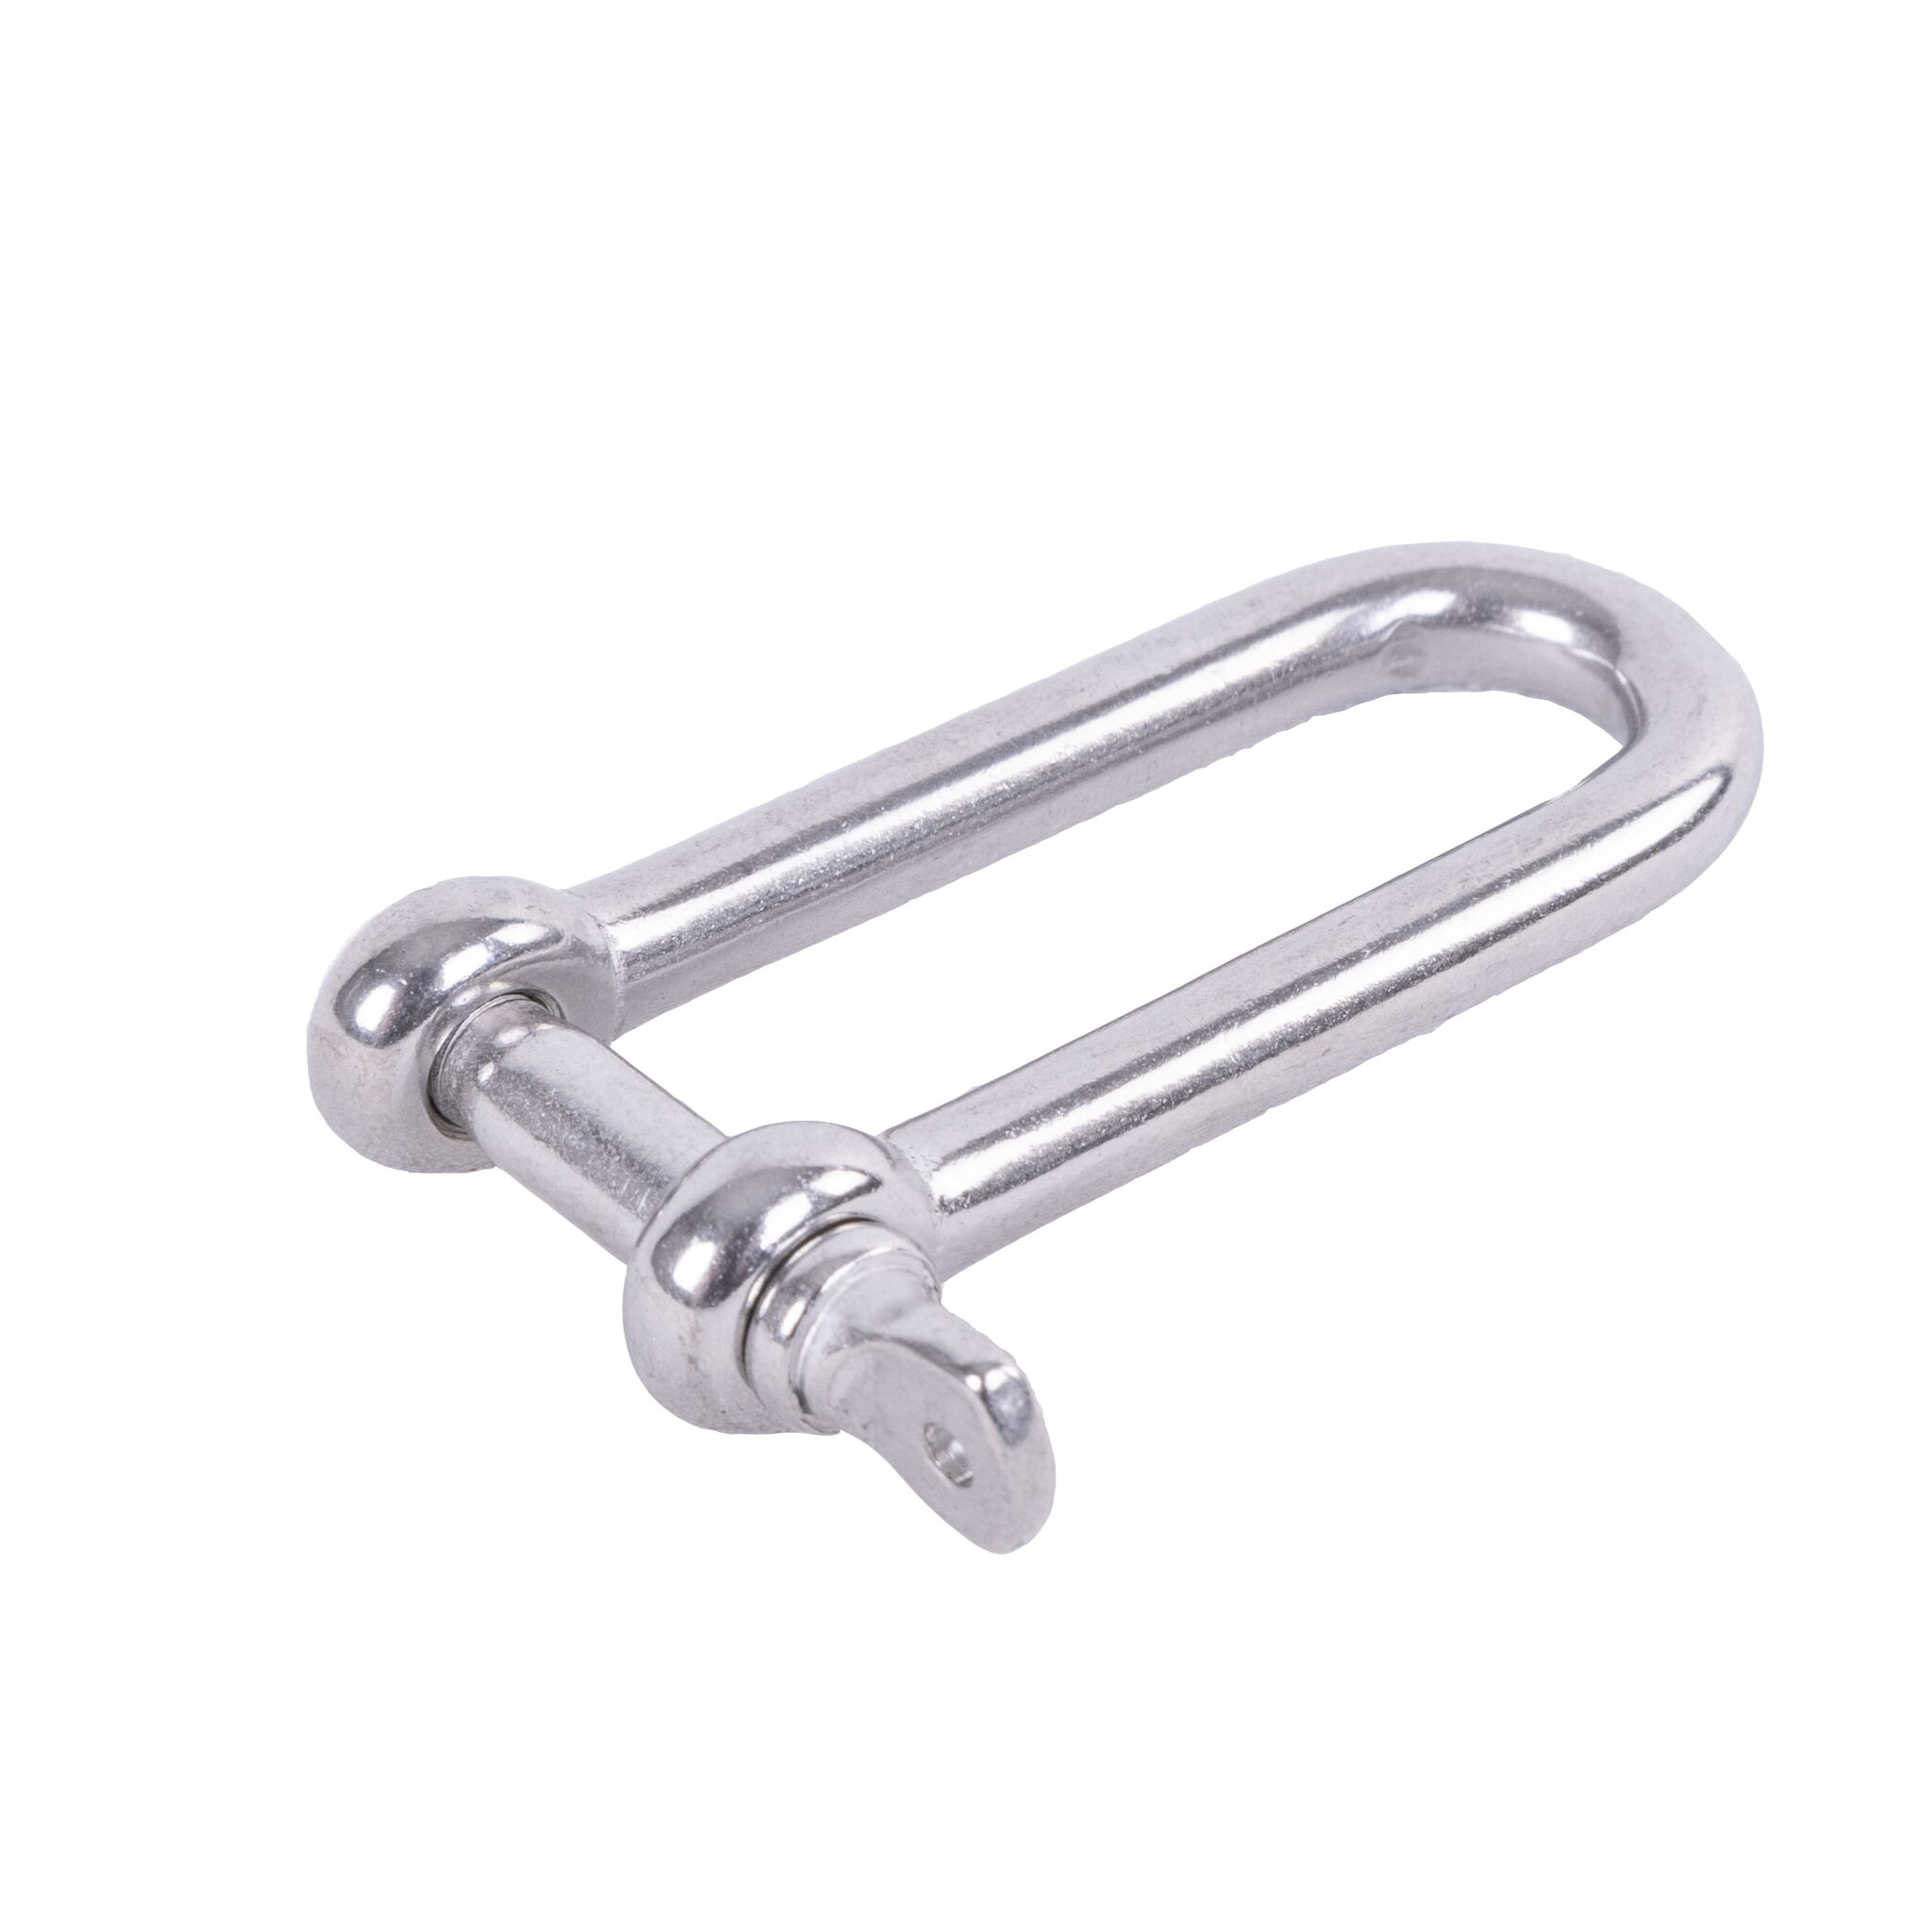 Shackle straight, extra long